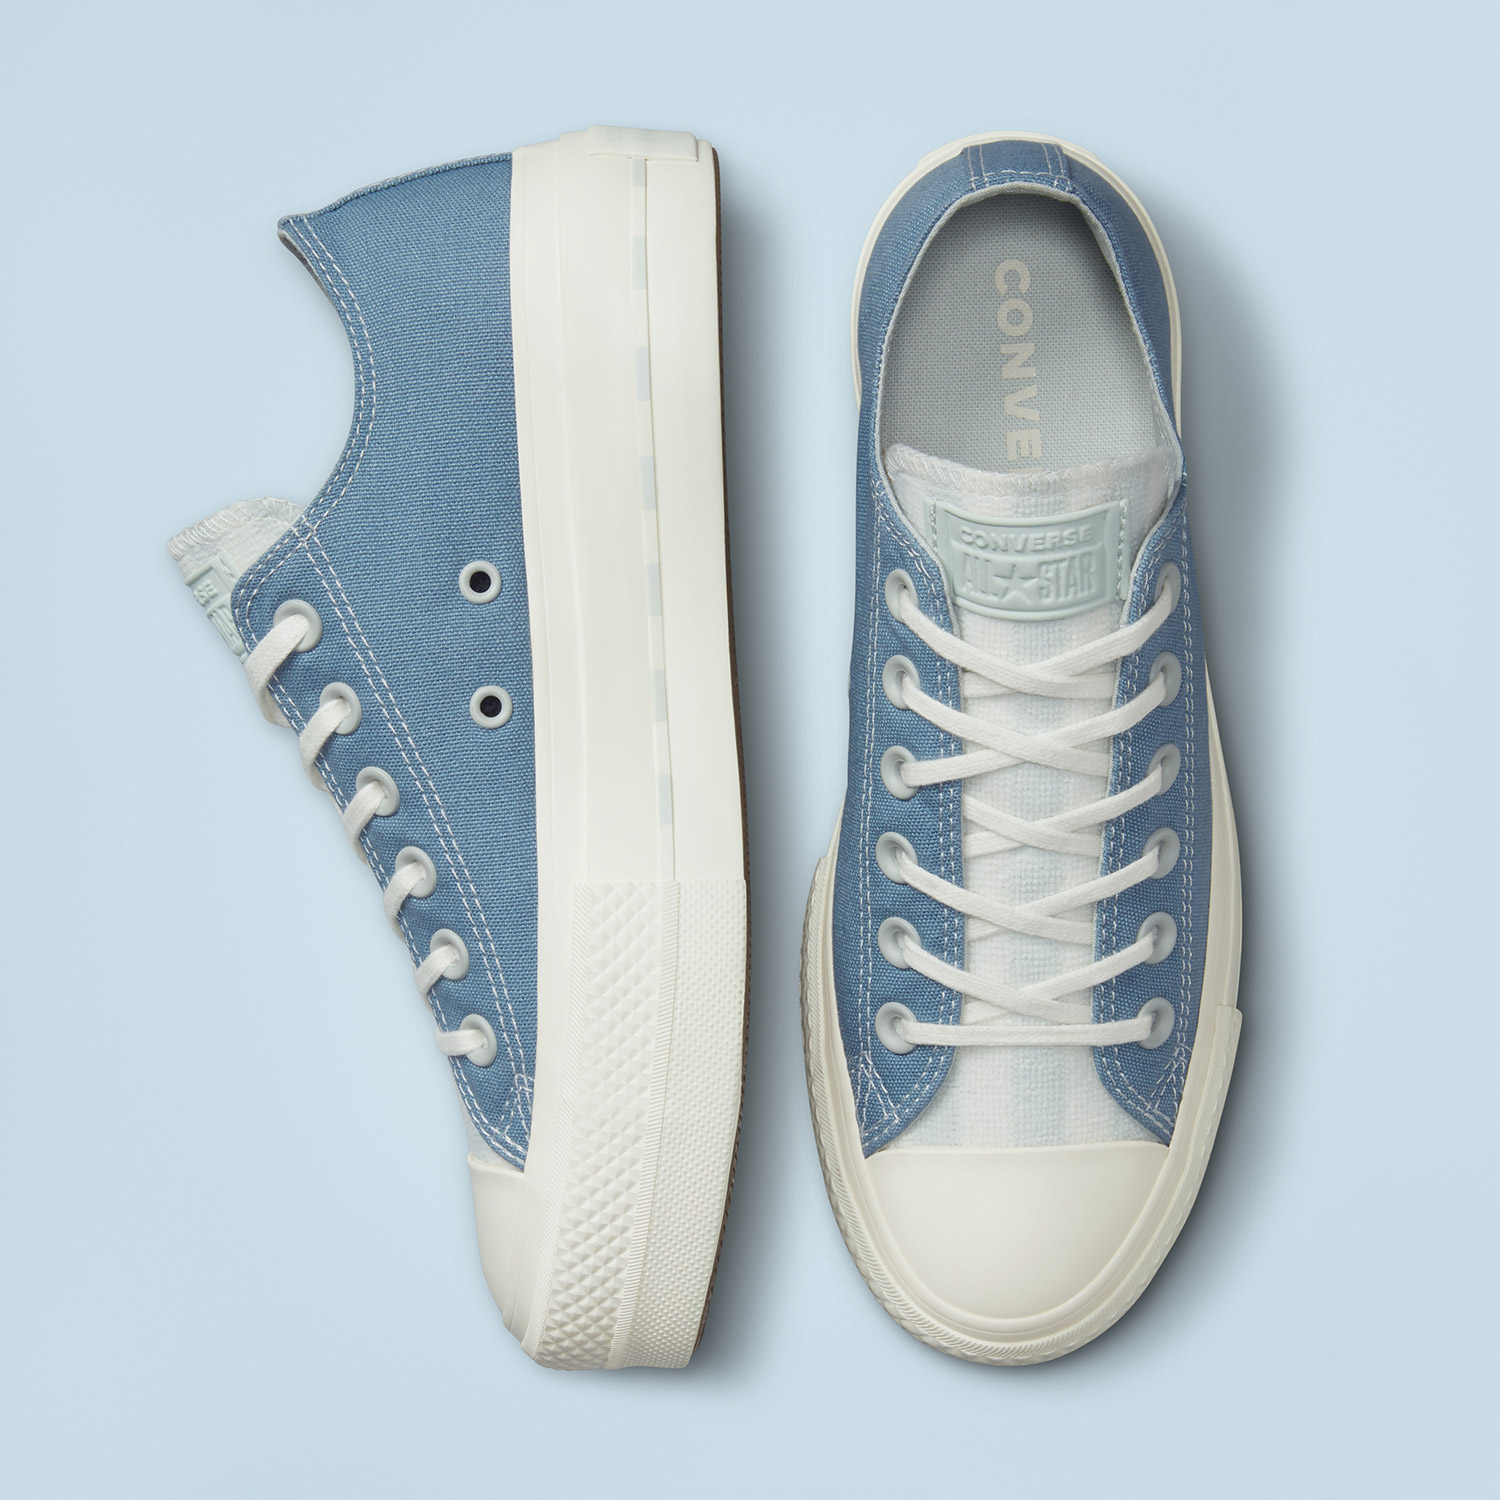  Chuck Taylor All Star Lift Crafted Canvas Platform